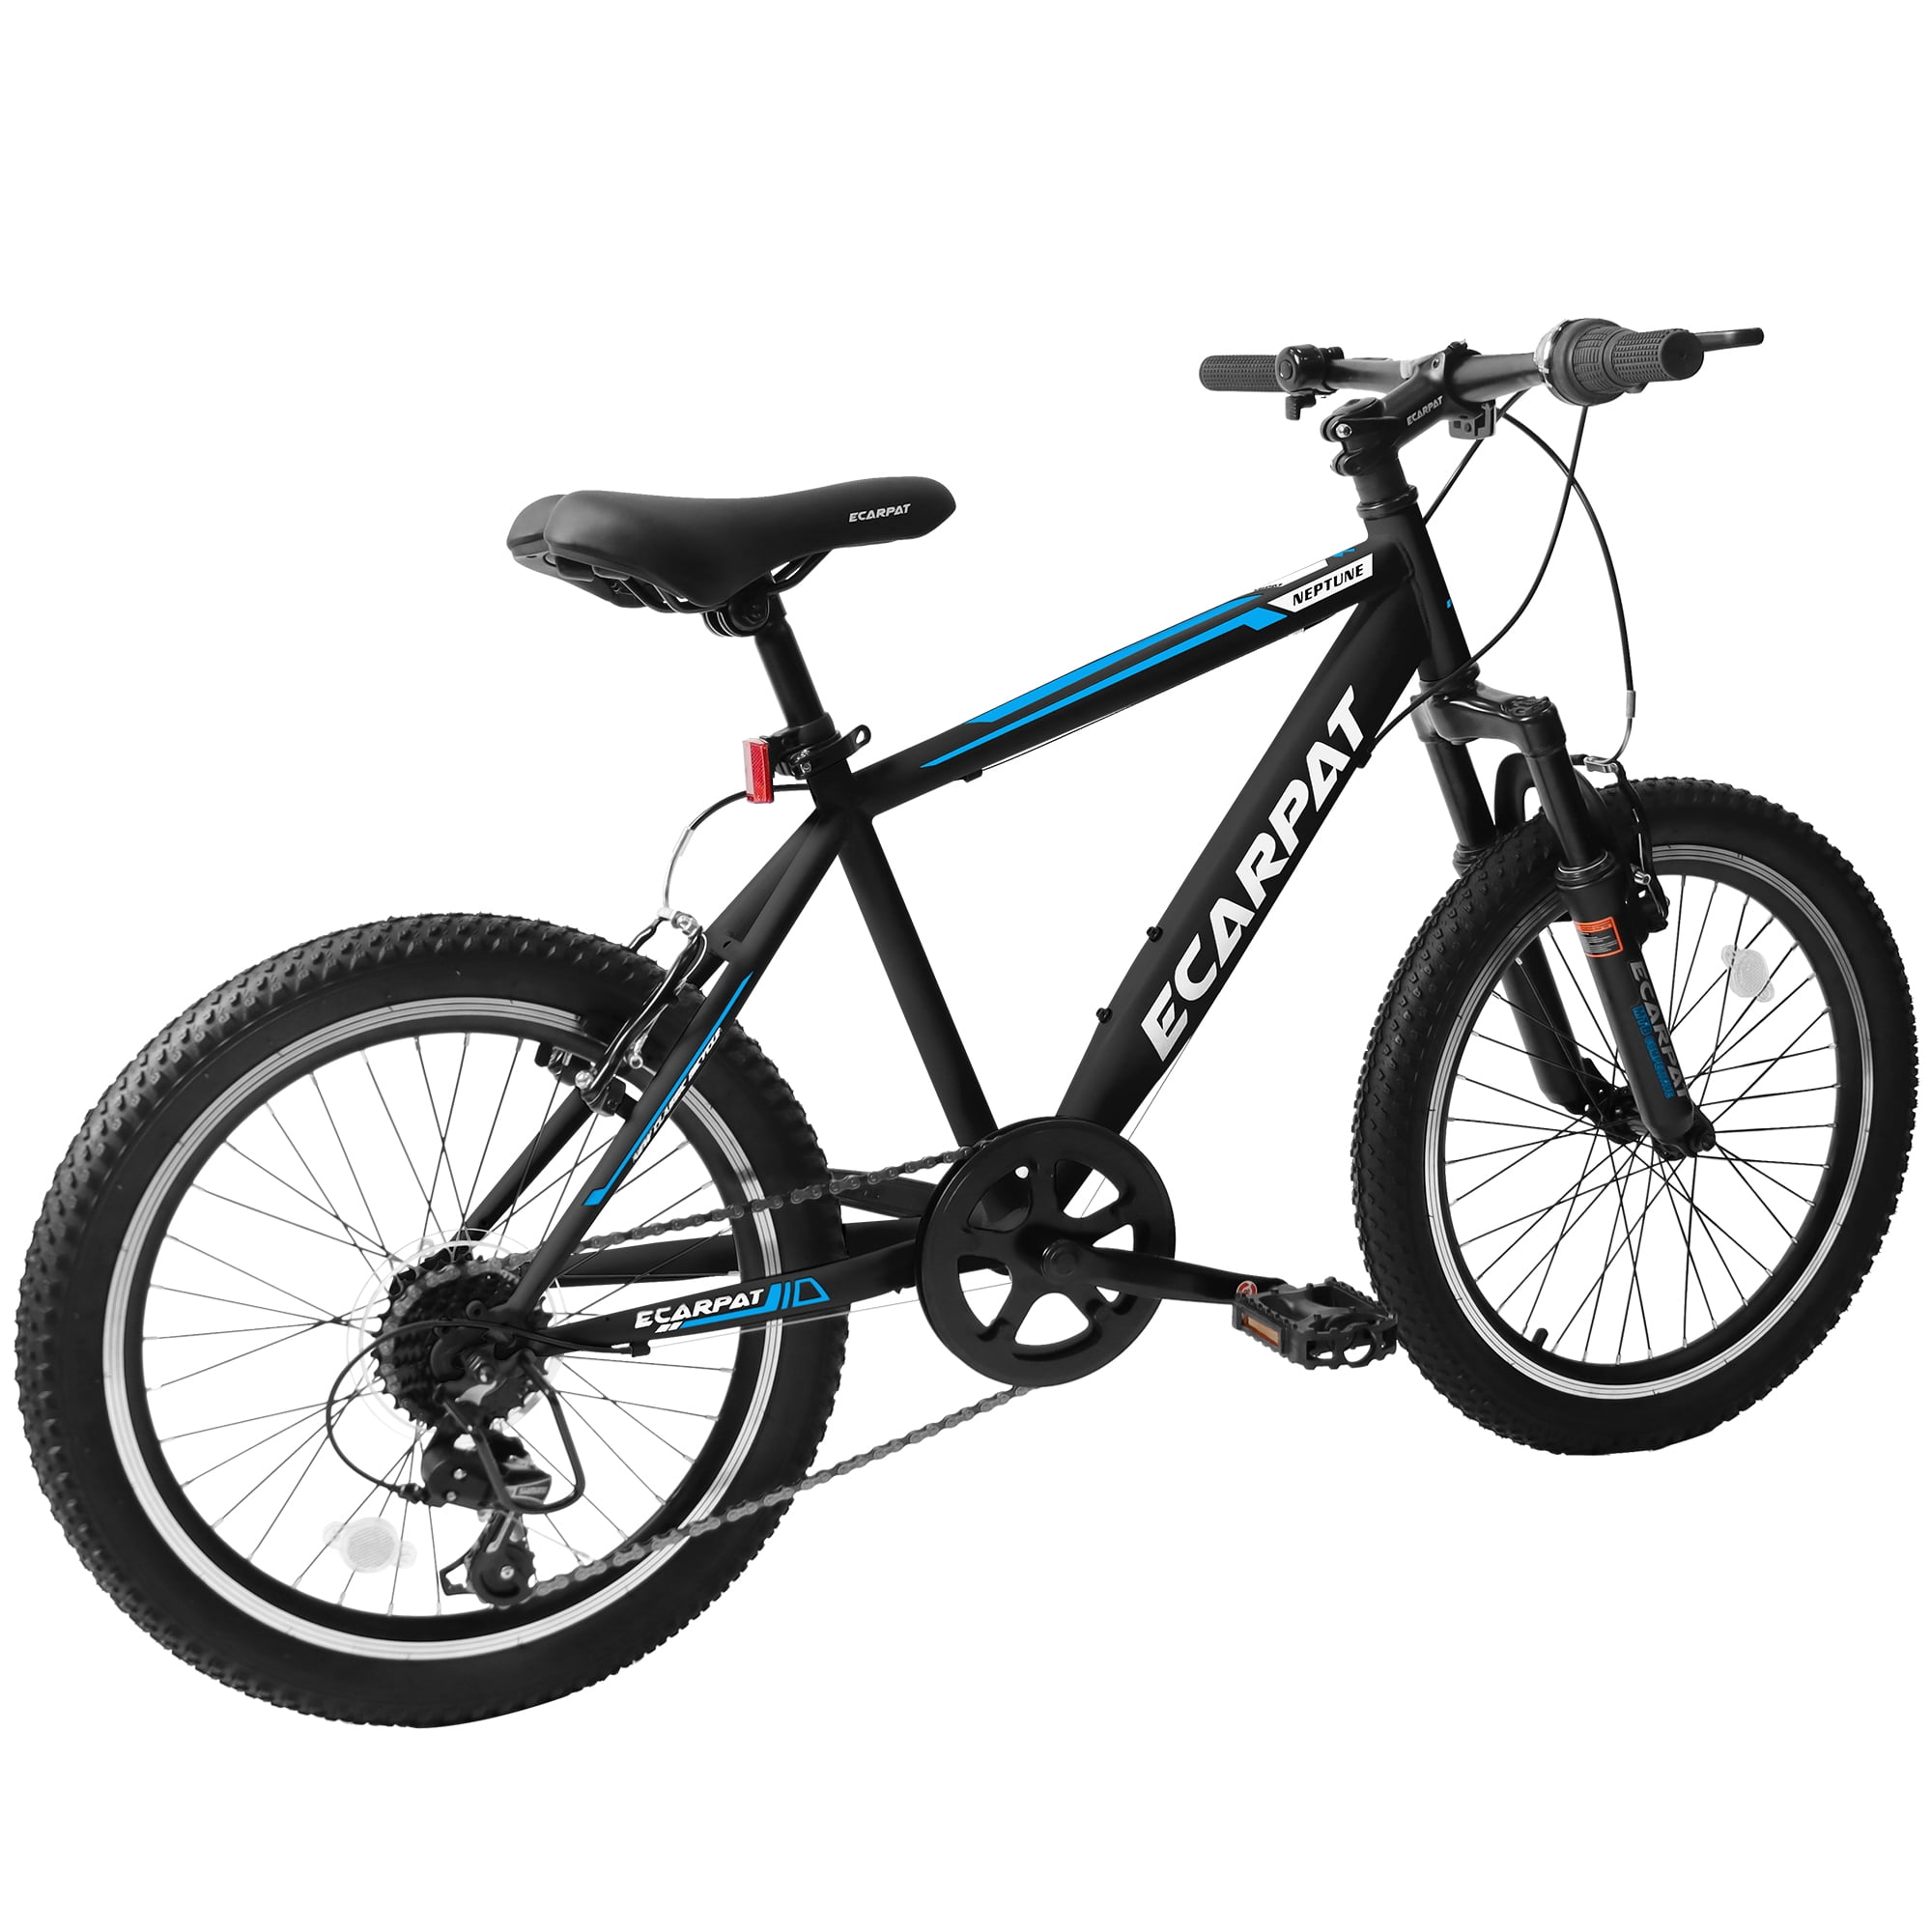 Kids Bicycle 20 Inch Montain Bike Gear Shimano 7 Speed Bike for 6-10 Ages Boys and Girls ,Blue